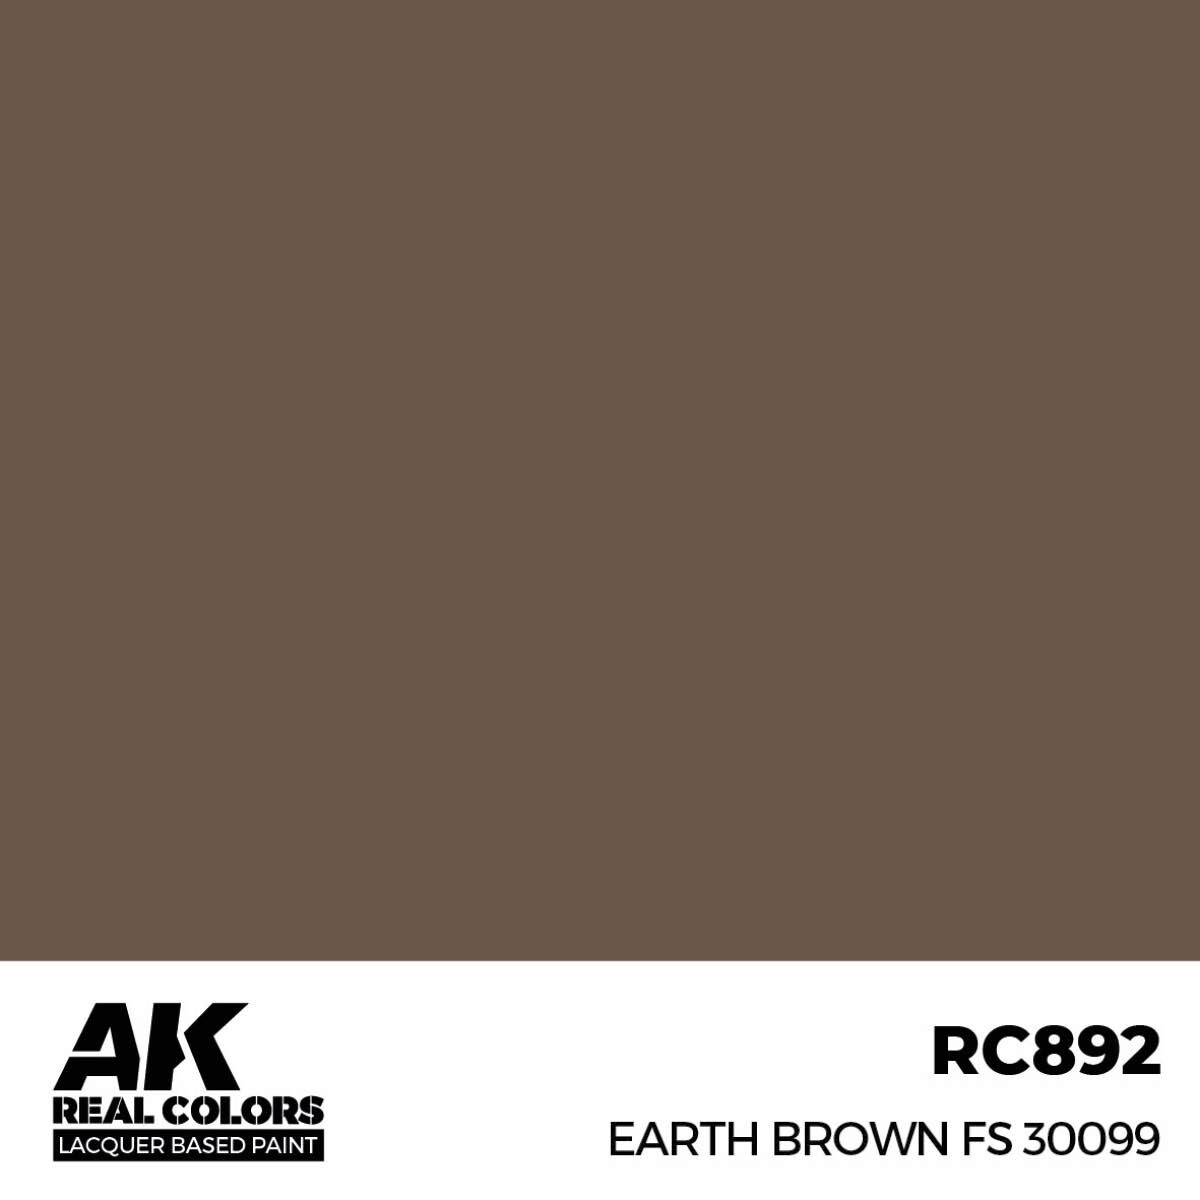 AK RC892 Real Colors Earth Brown FS 30099  17 ml.